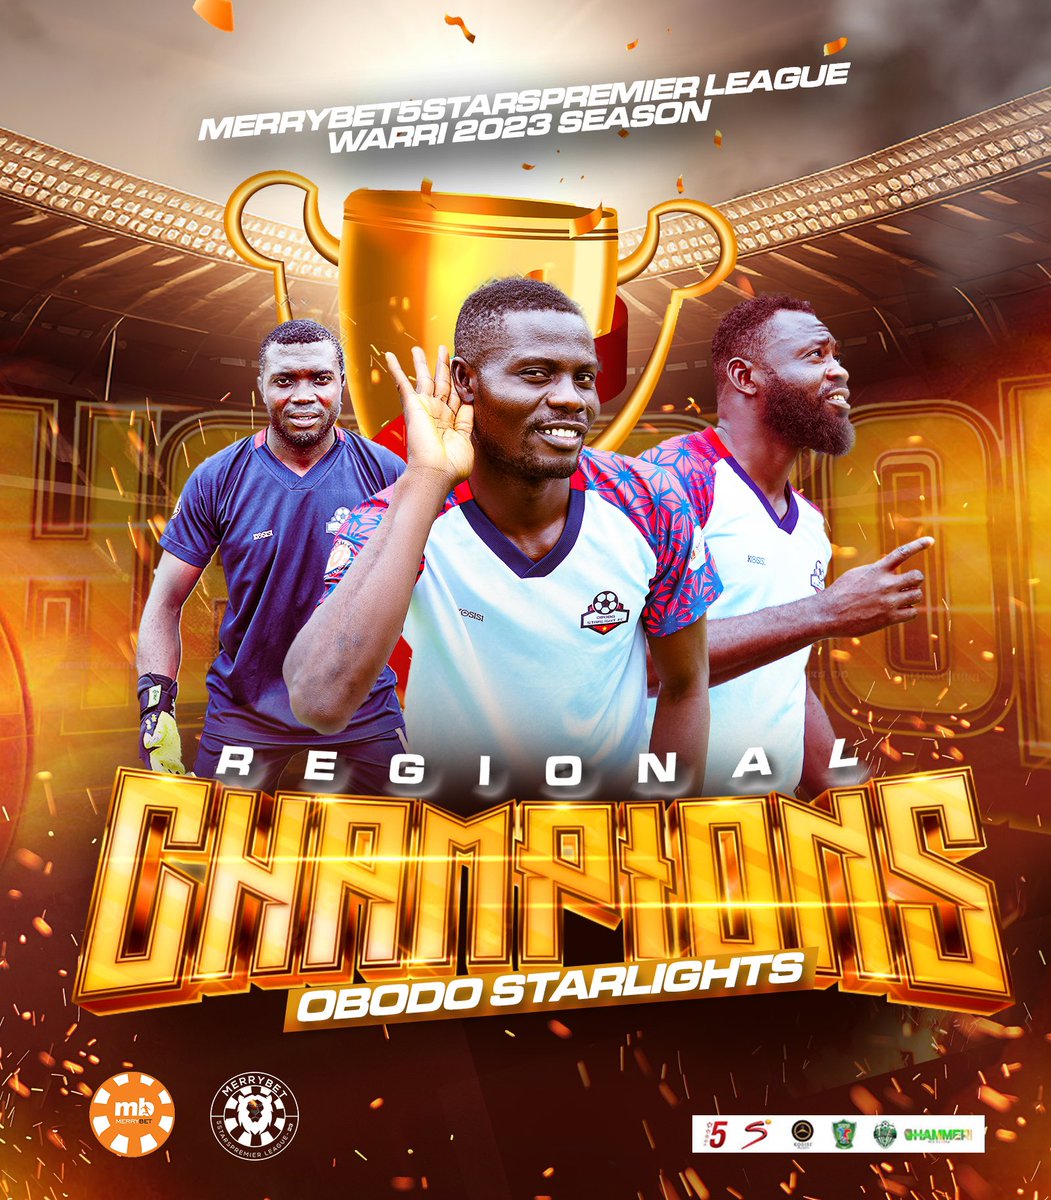 After intense weeks of LIVE match days. We now have the CHAMPIONS in Warri !!

Let’s welcome @obodostarlightfc as the Regional Champions in Warri of the Merrybet5stars Premier League 2023 !! They will be in Lagos to battle for the National Championship. ✈️